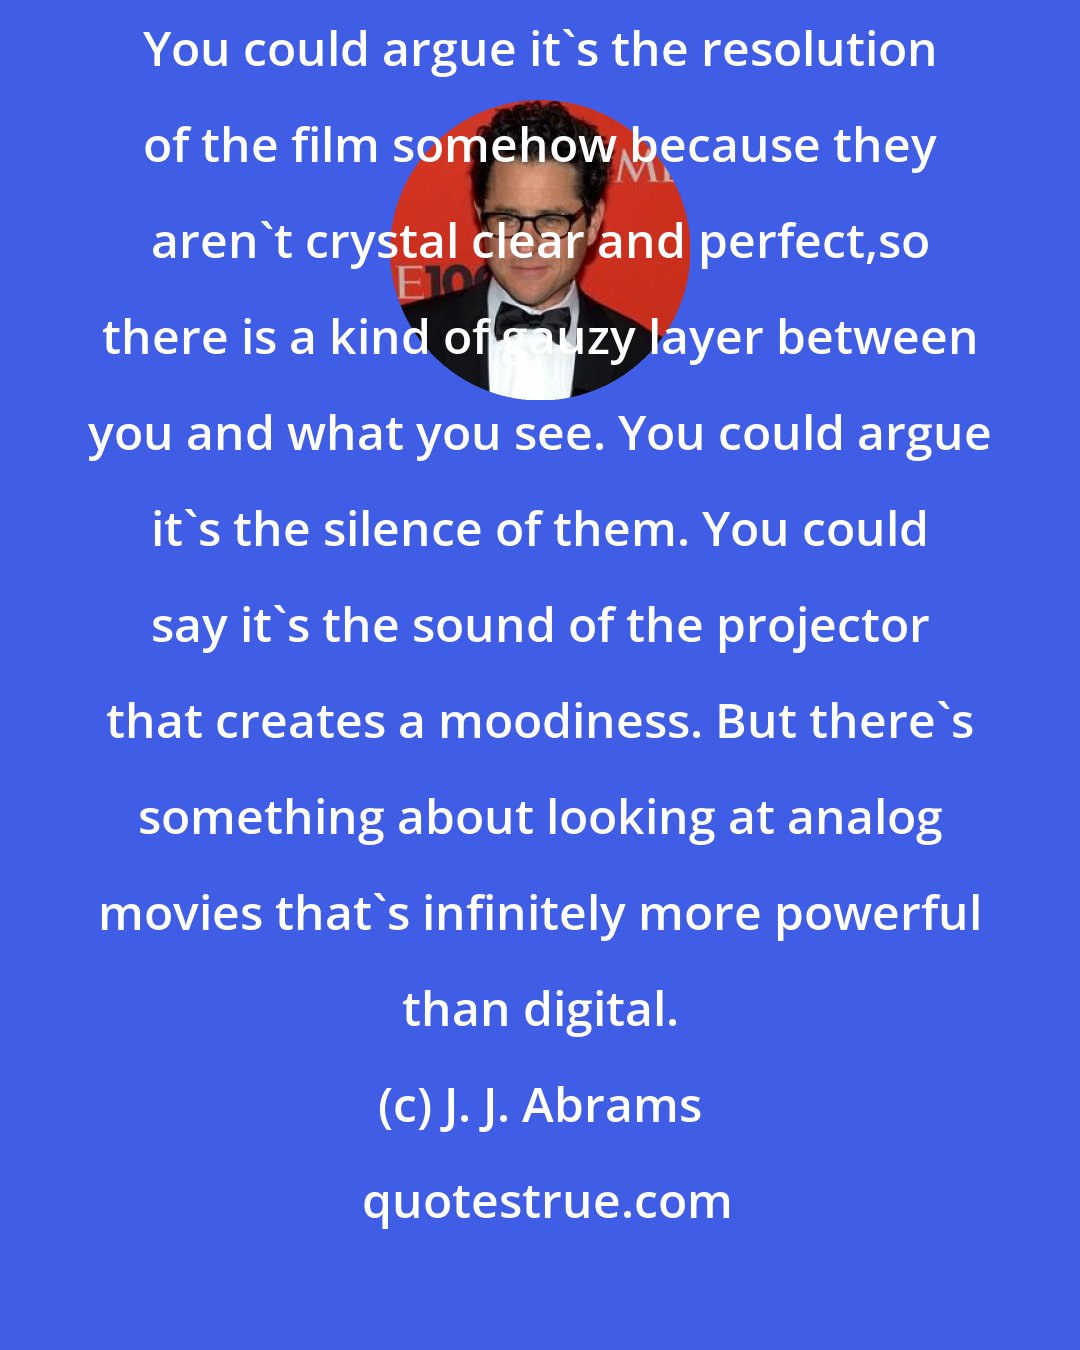 J. J. Abrams: There's something about looking at Super 8 films that is so evocative. You could argue it's the resolution of the film somehow because they aren't crystal clear and perfect,so there is a kind of gauzy layer between you and what you see. You could argue it's the silence of them. You could say it's the sound of the projector that creates a moodiness. But there's something about looking at analog movies that's infinitely more powerful than digital.